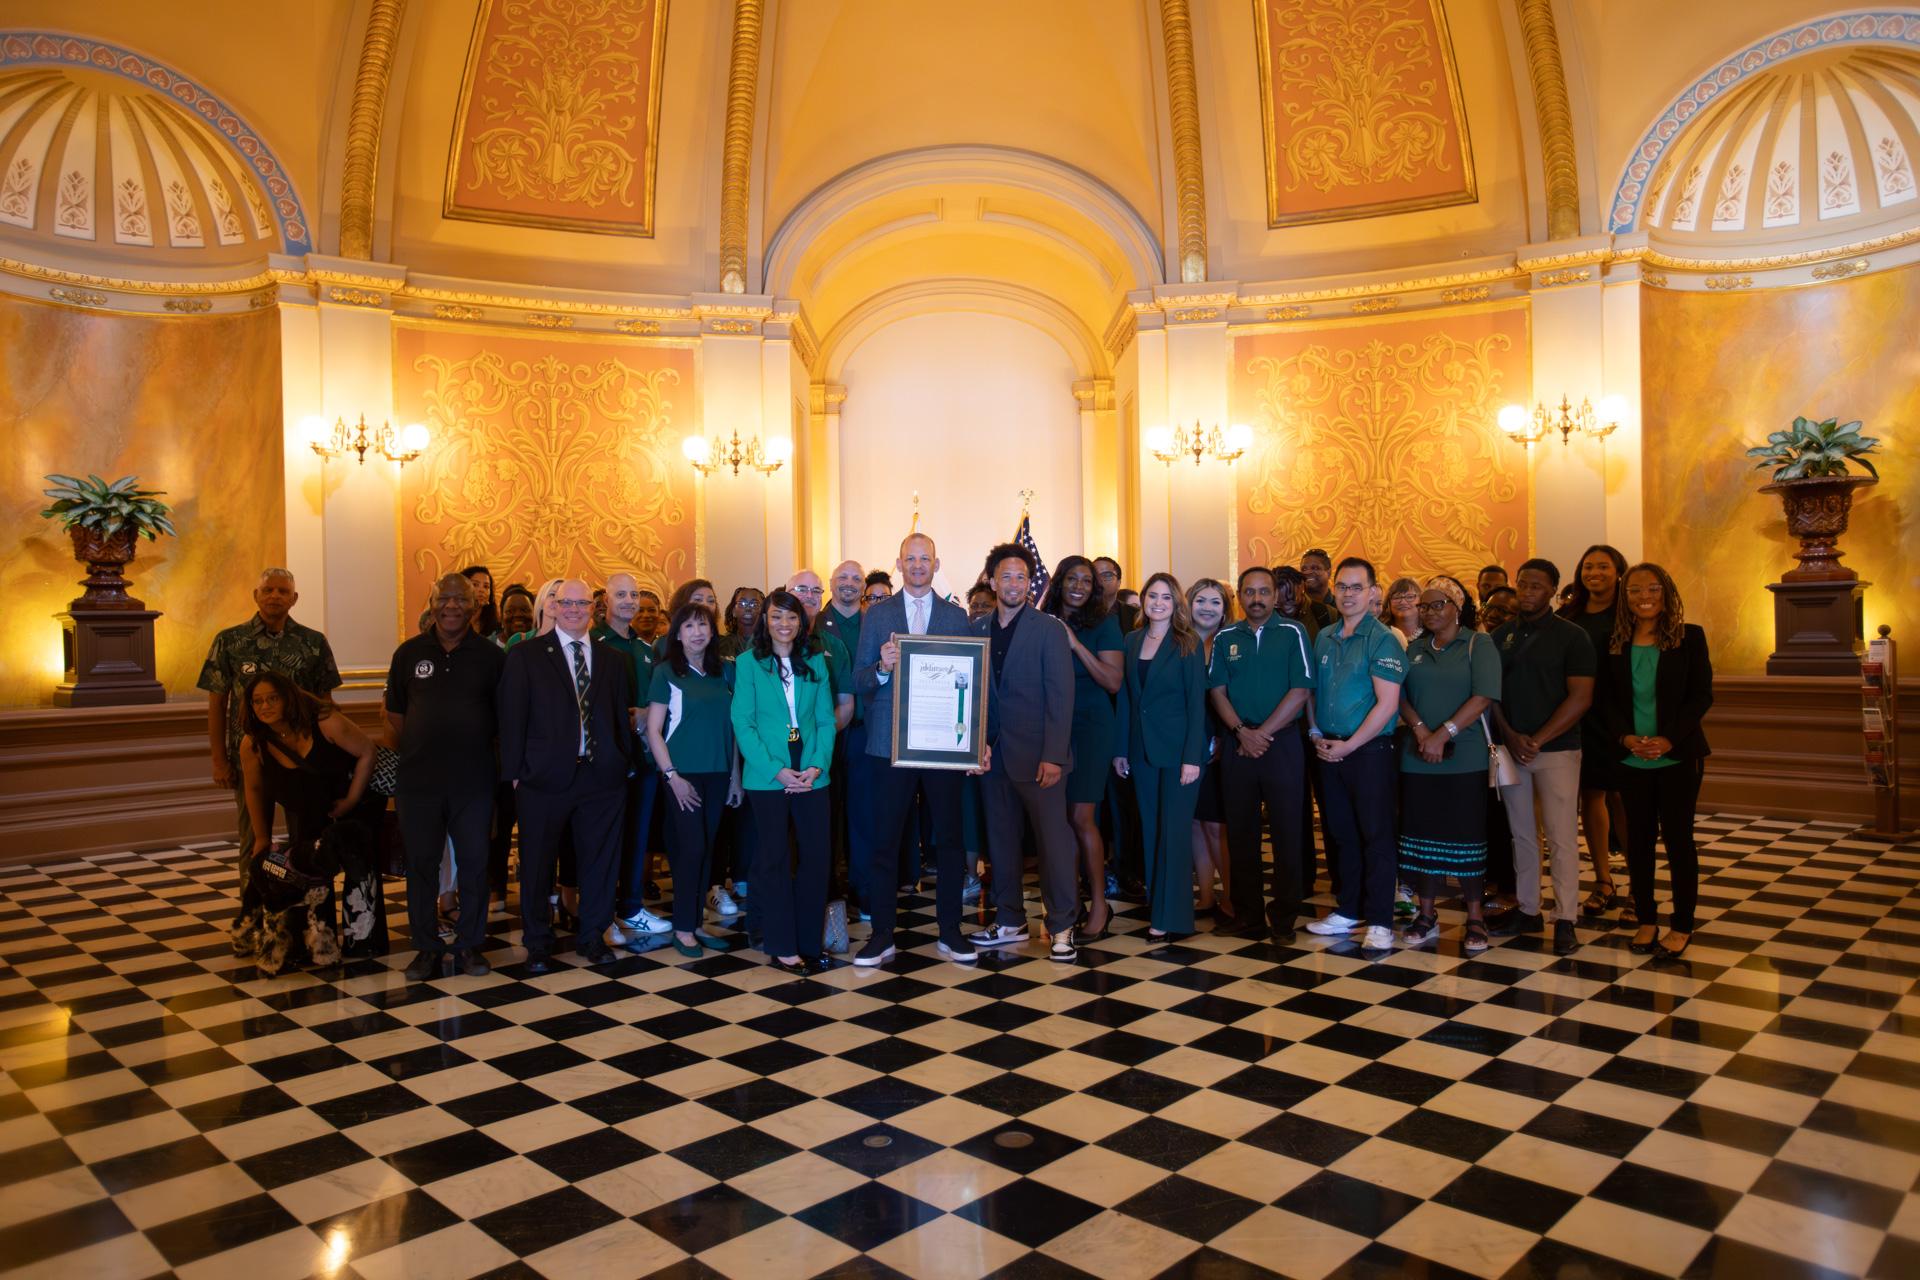 State lawmakers and members of the Sacramento State administration pose inside the Capitol.